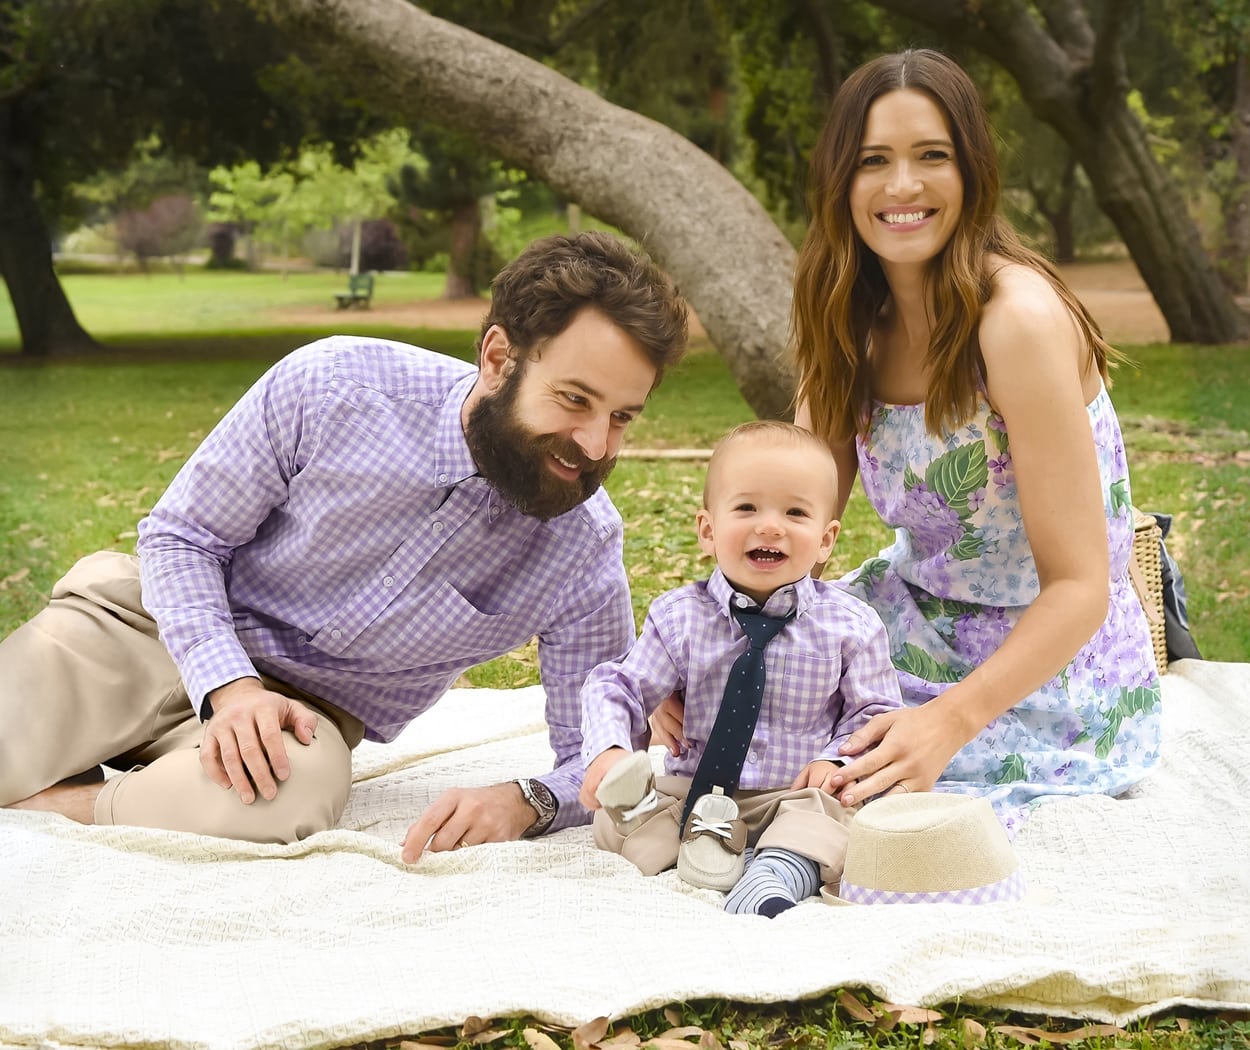 Mandy Moore and her husband Taylor Goldsmith celebrated their son August Harrison's first birthday on February 20, 2022